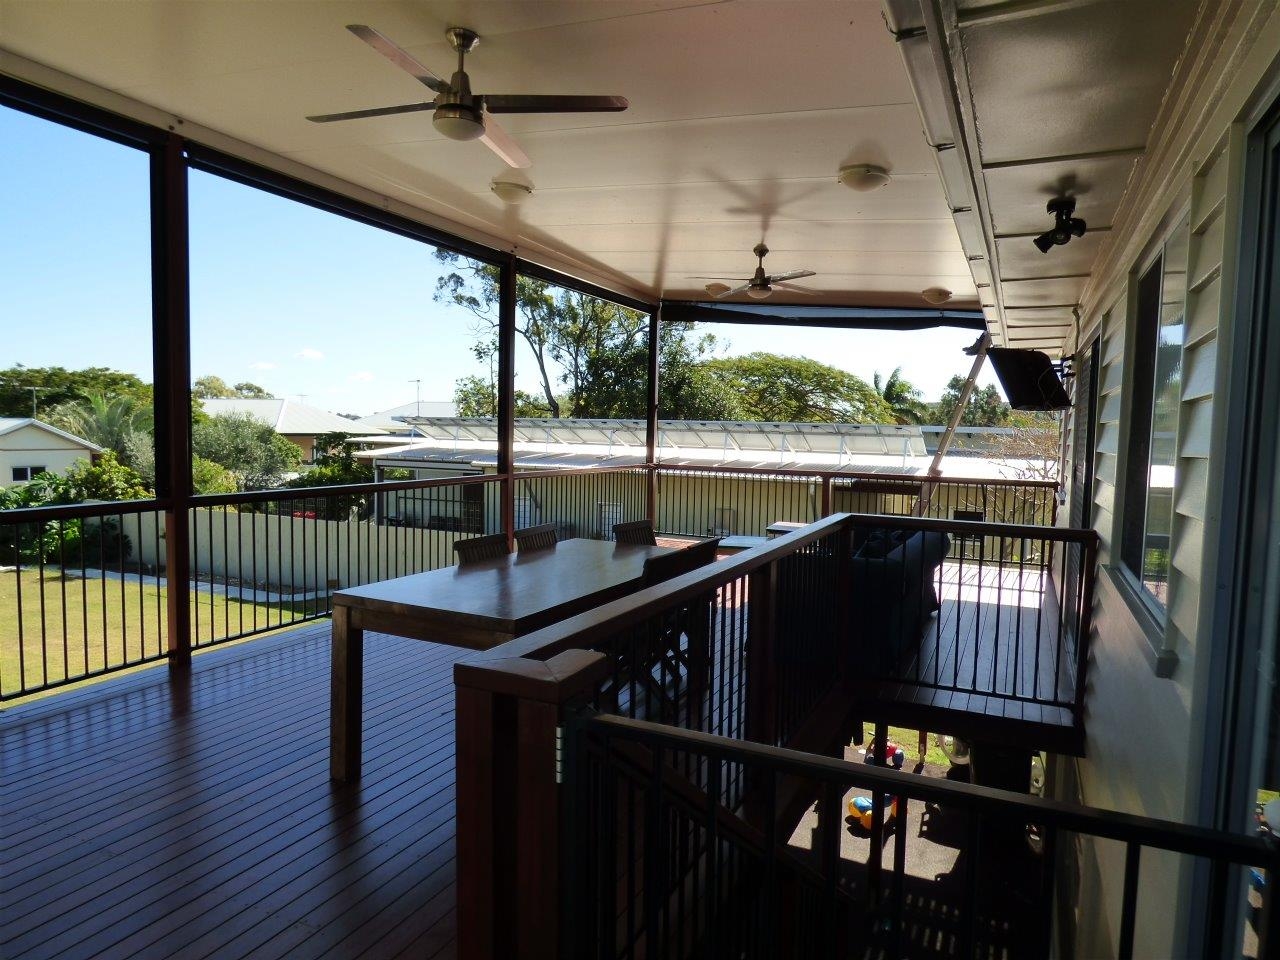 Beautiful timber decking and patio